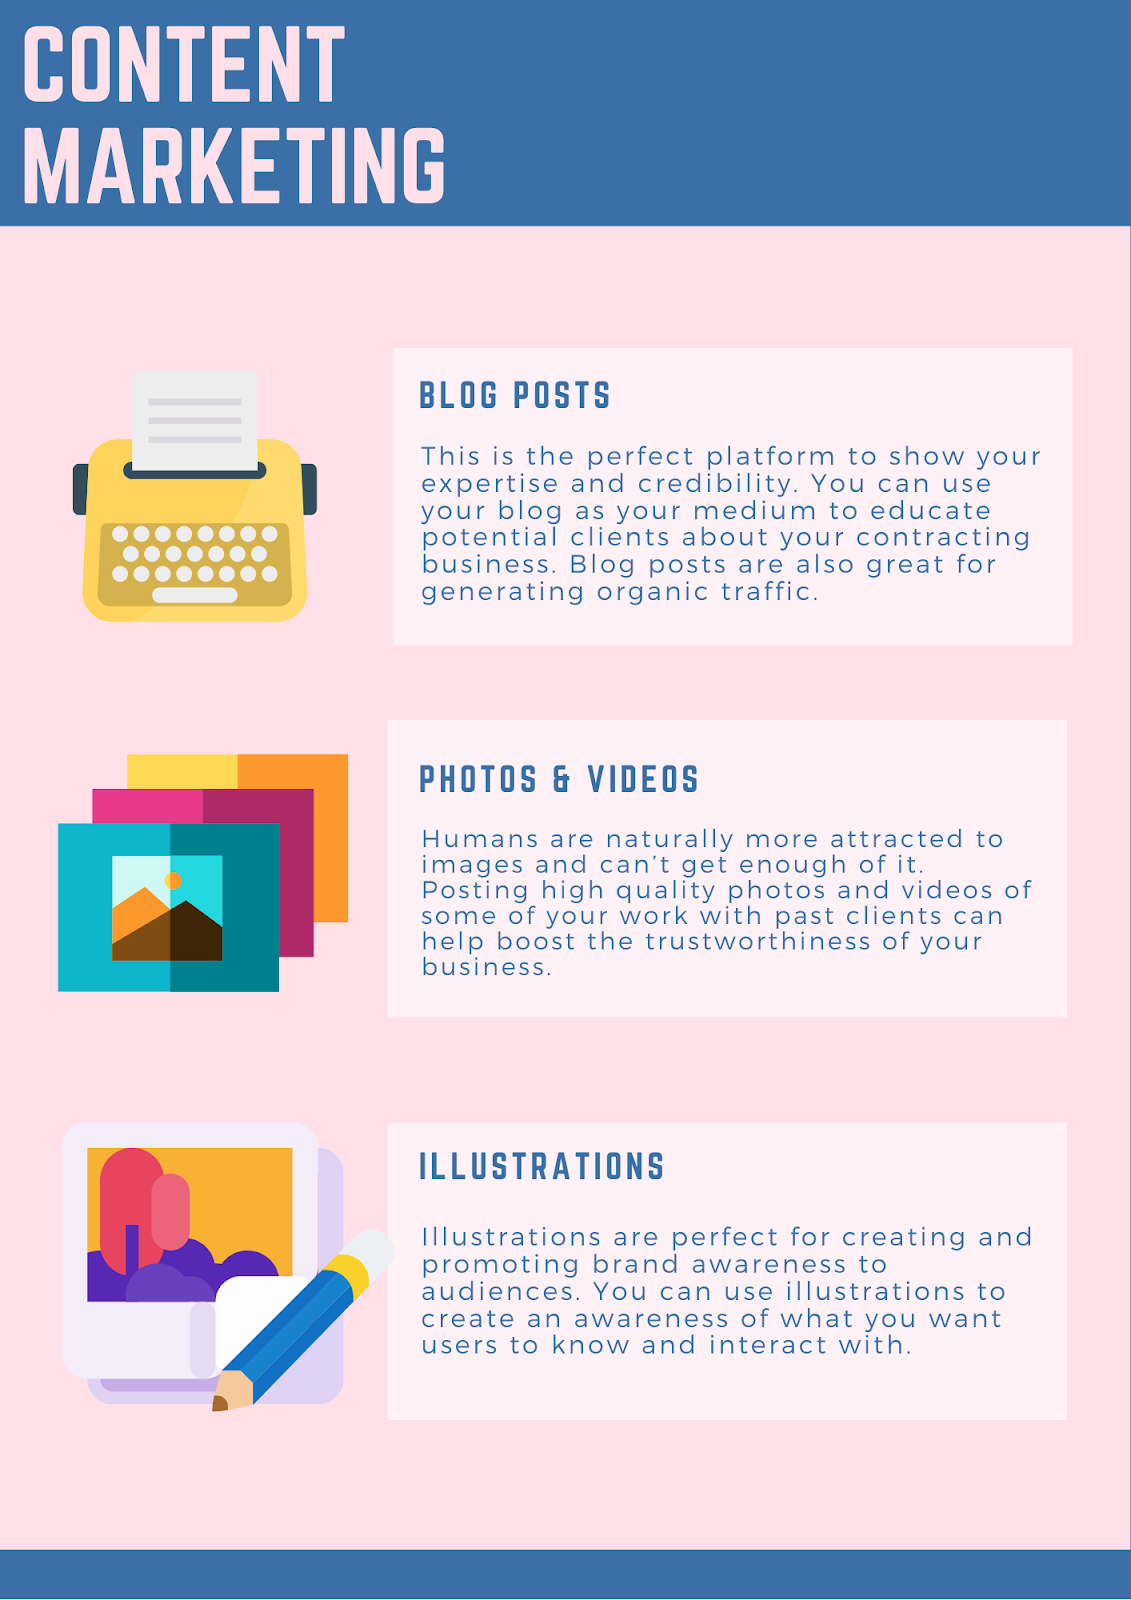 Content Marketing tips infographic